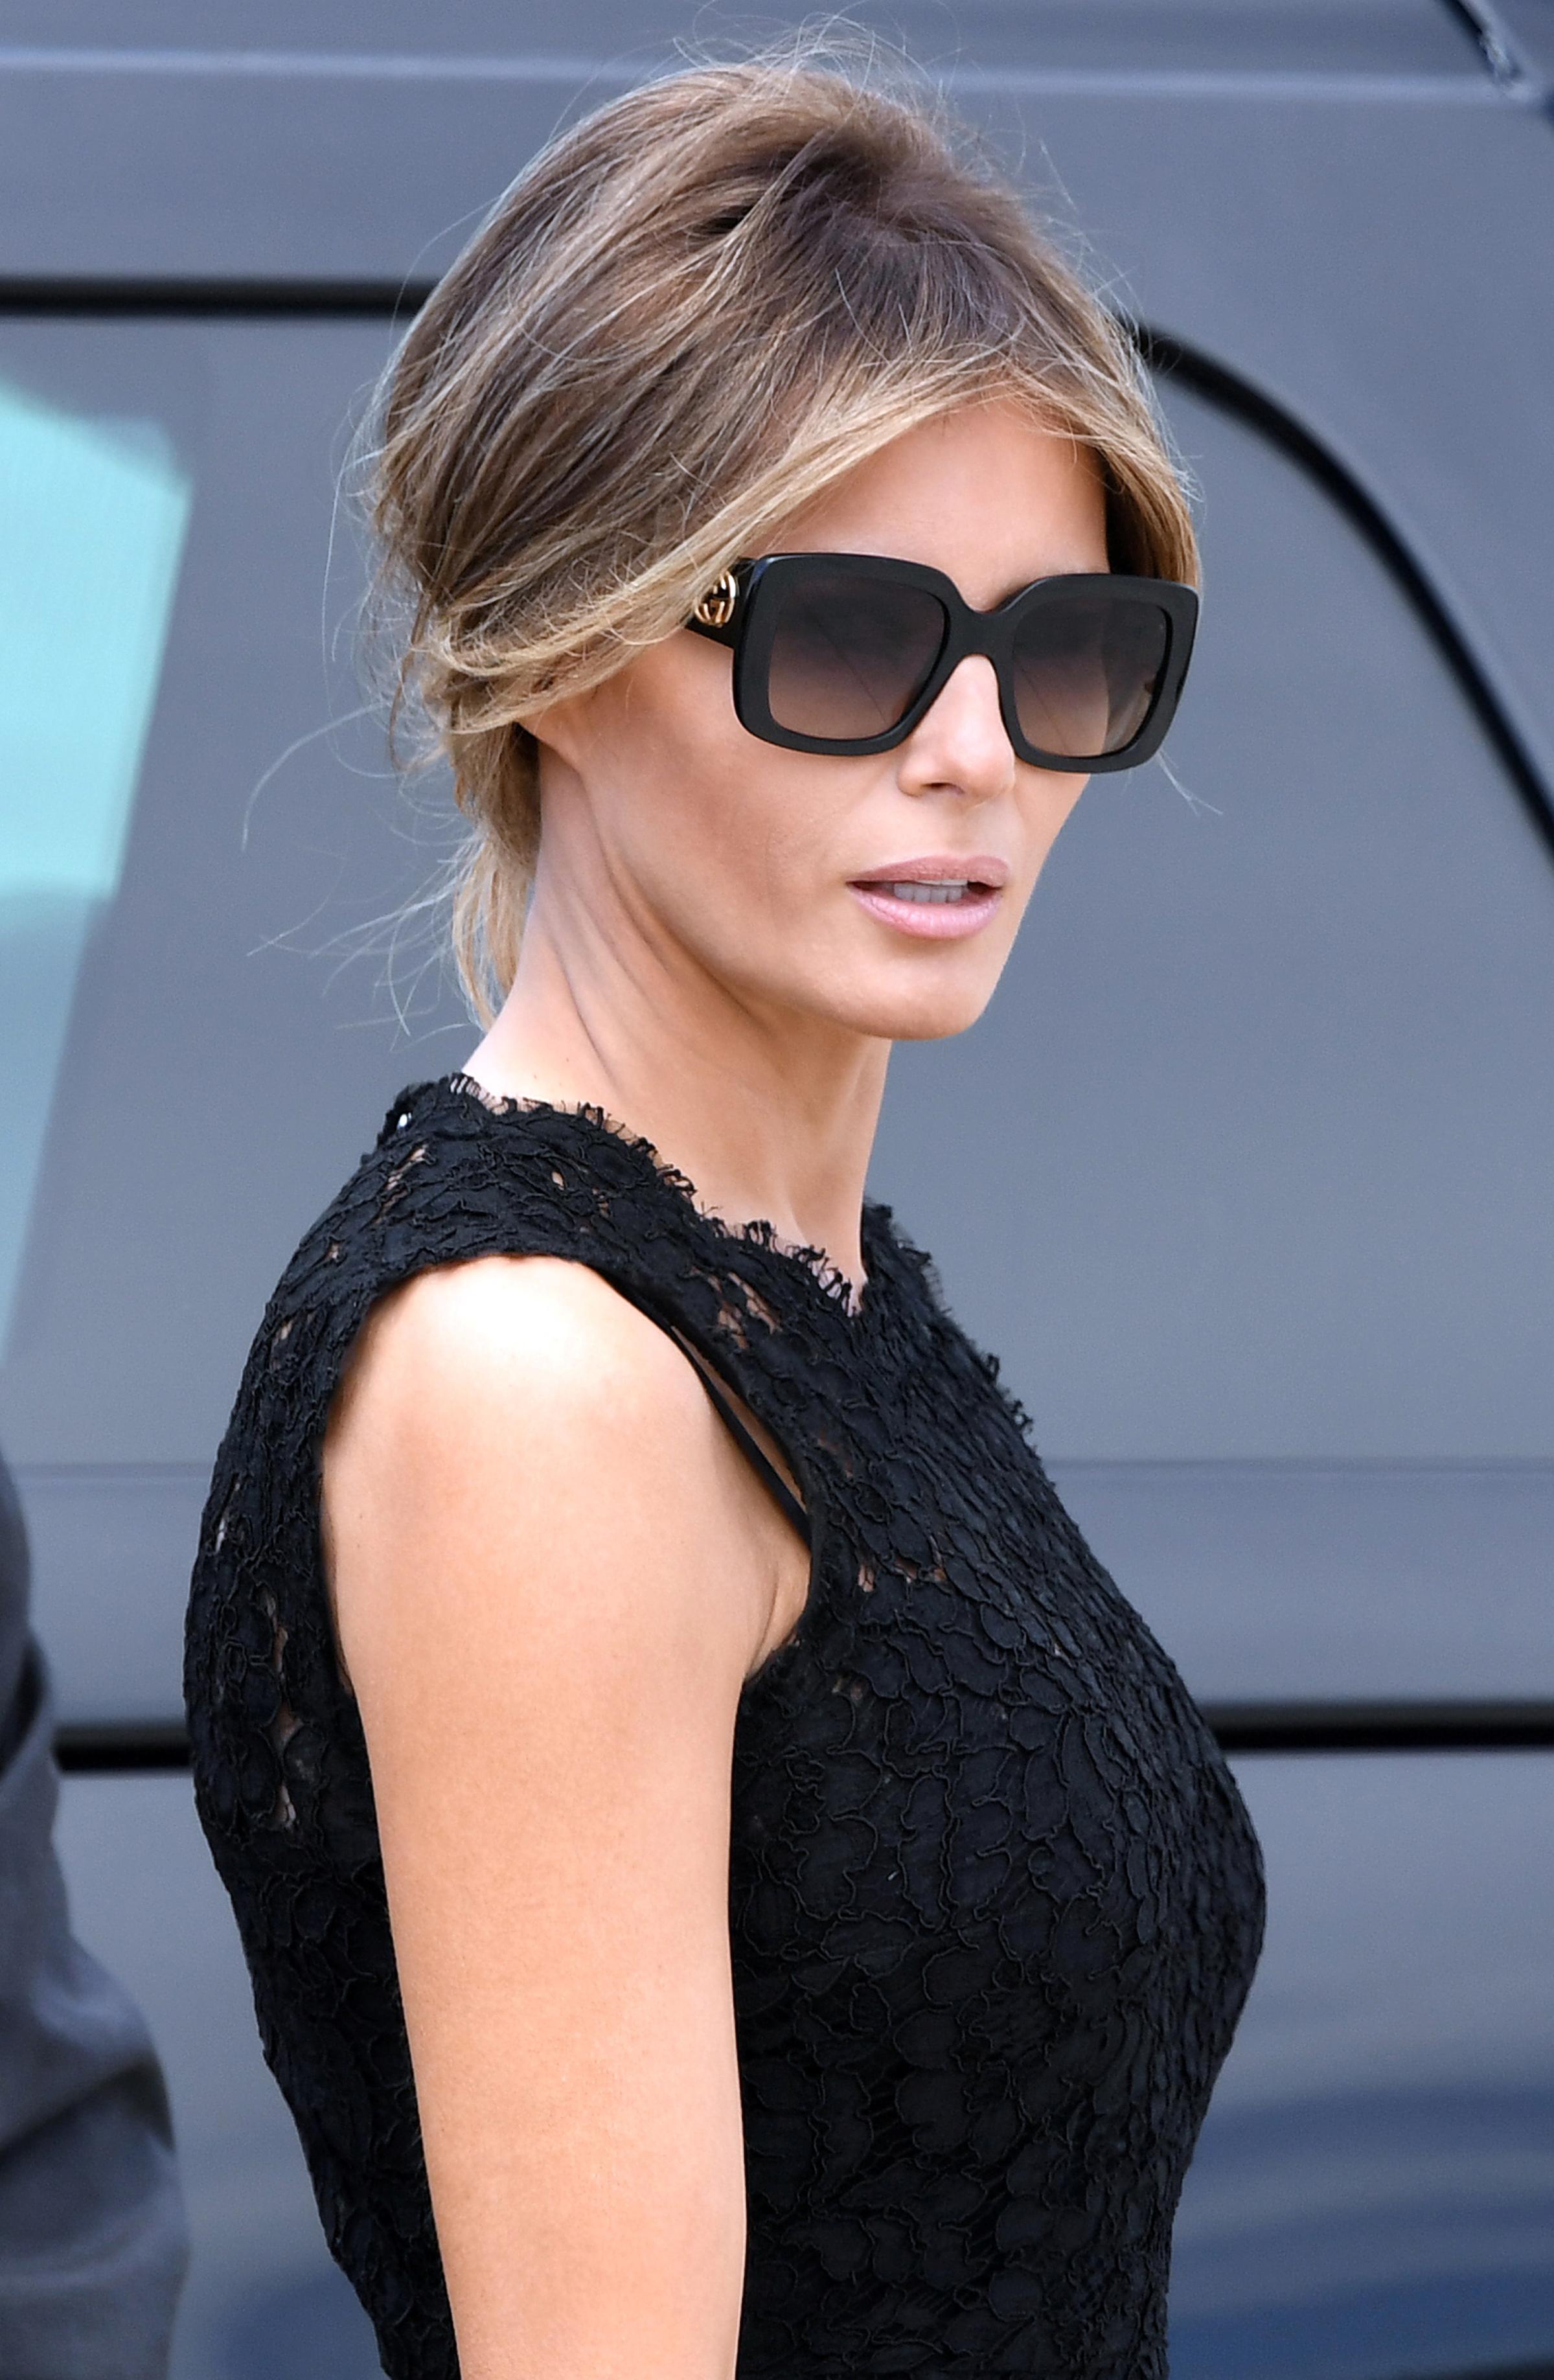 First lady Melania Trump wearing oversized square sunglasses s seen before boarding Air Force One at Leonardo da Vinci-Fiumicino Airport in Rome, Italy, May 24, 2017.